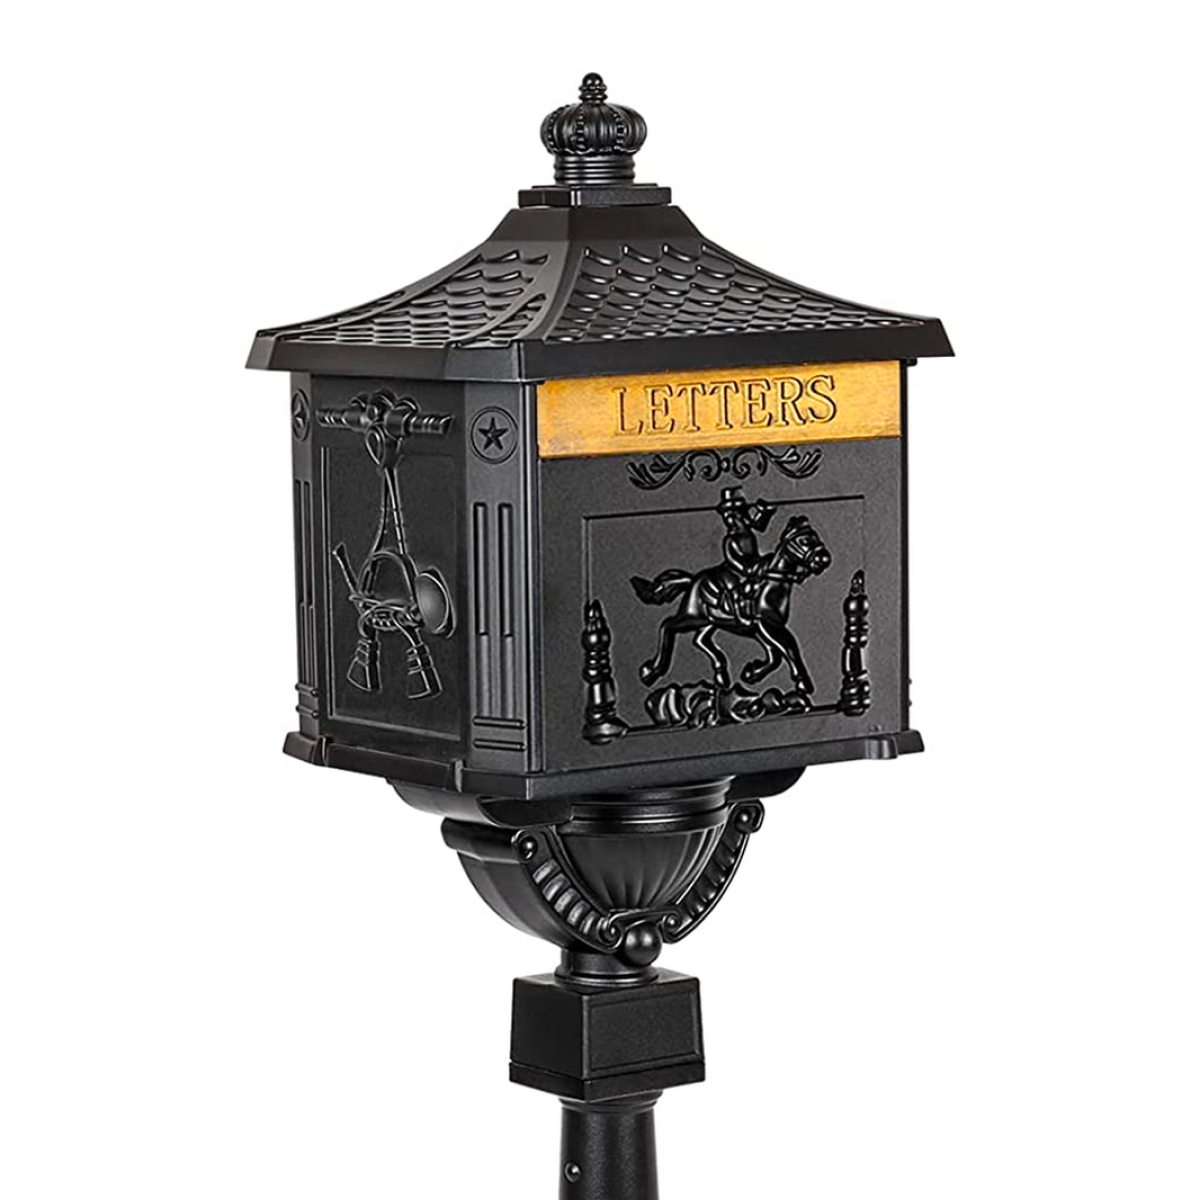 Amco Victorian Pedestal Mailbox Product Image